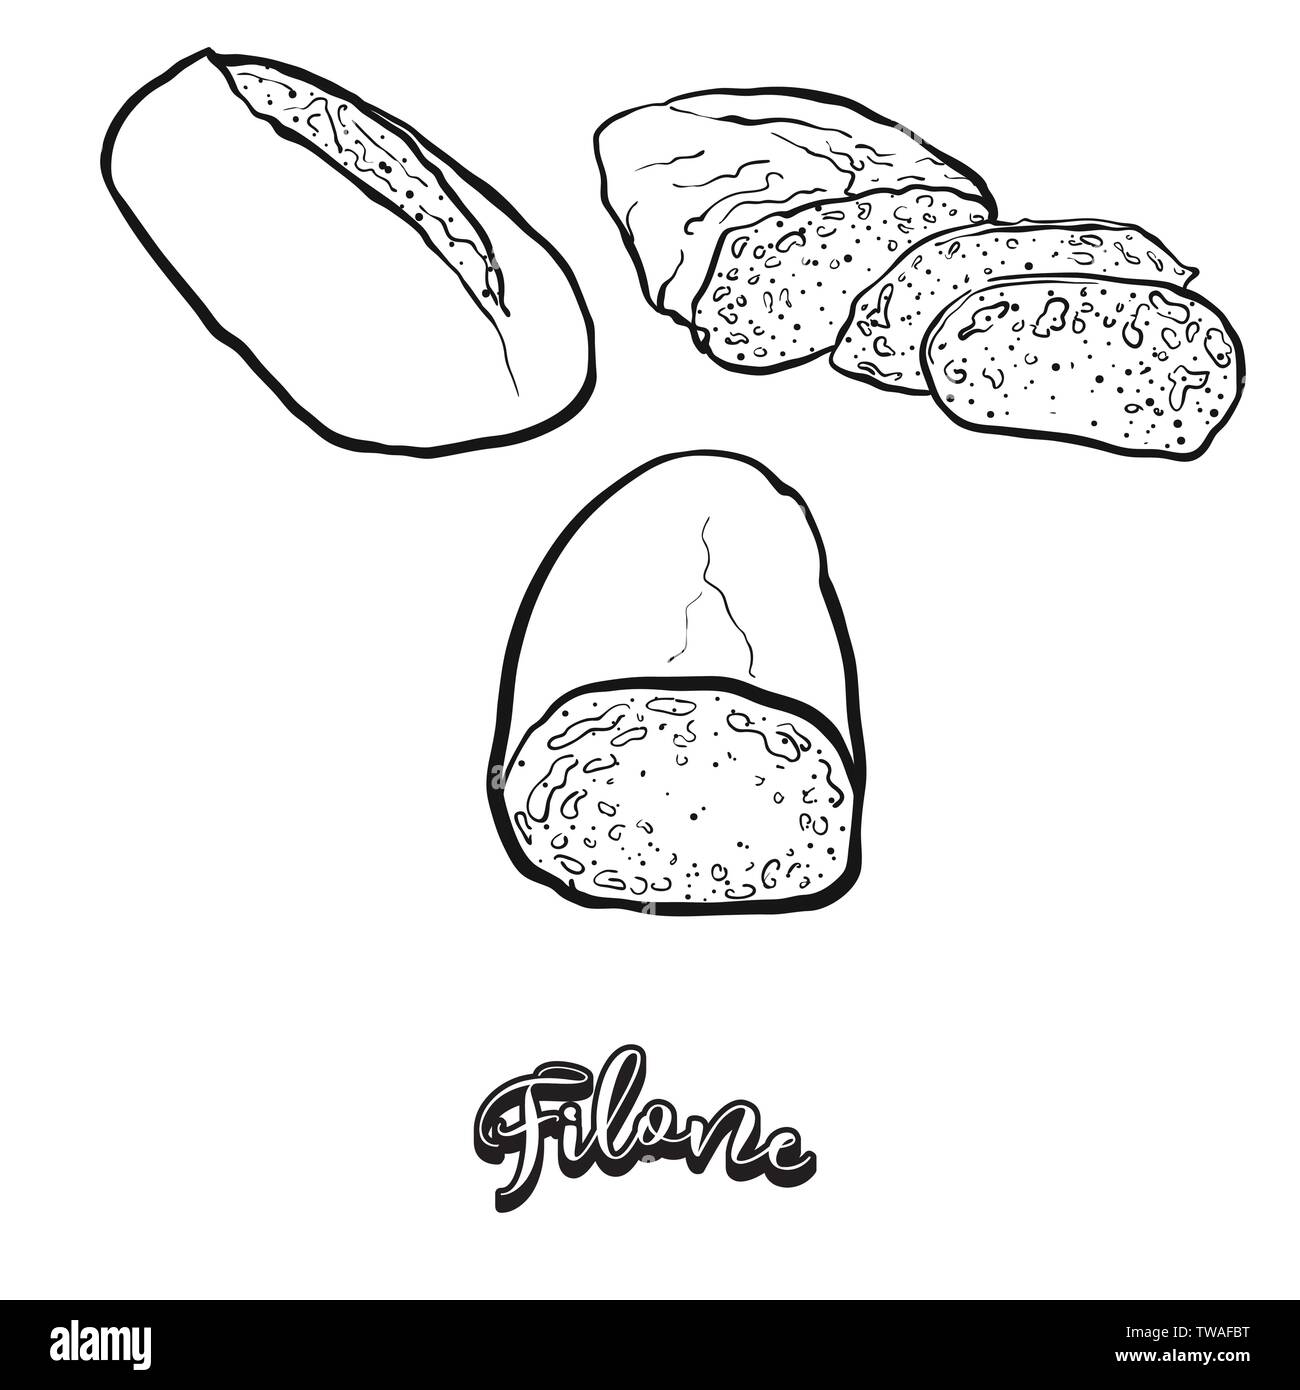 Filone food sketch on chalkboard. Vector drawing of Leavened, usually known in Italy. Food illustration series. Stock Vector